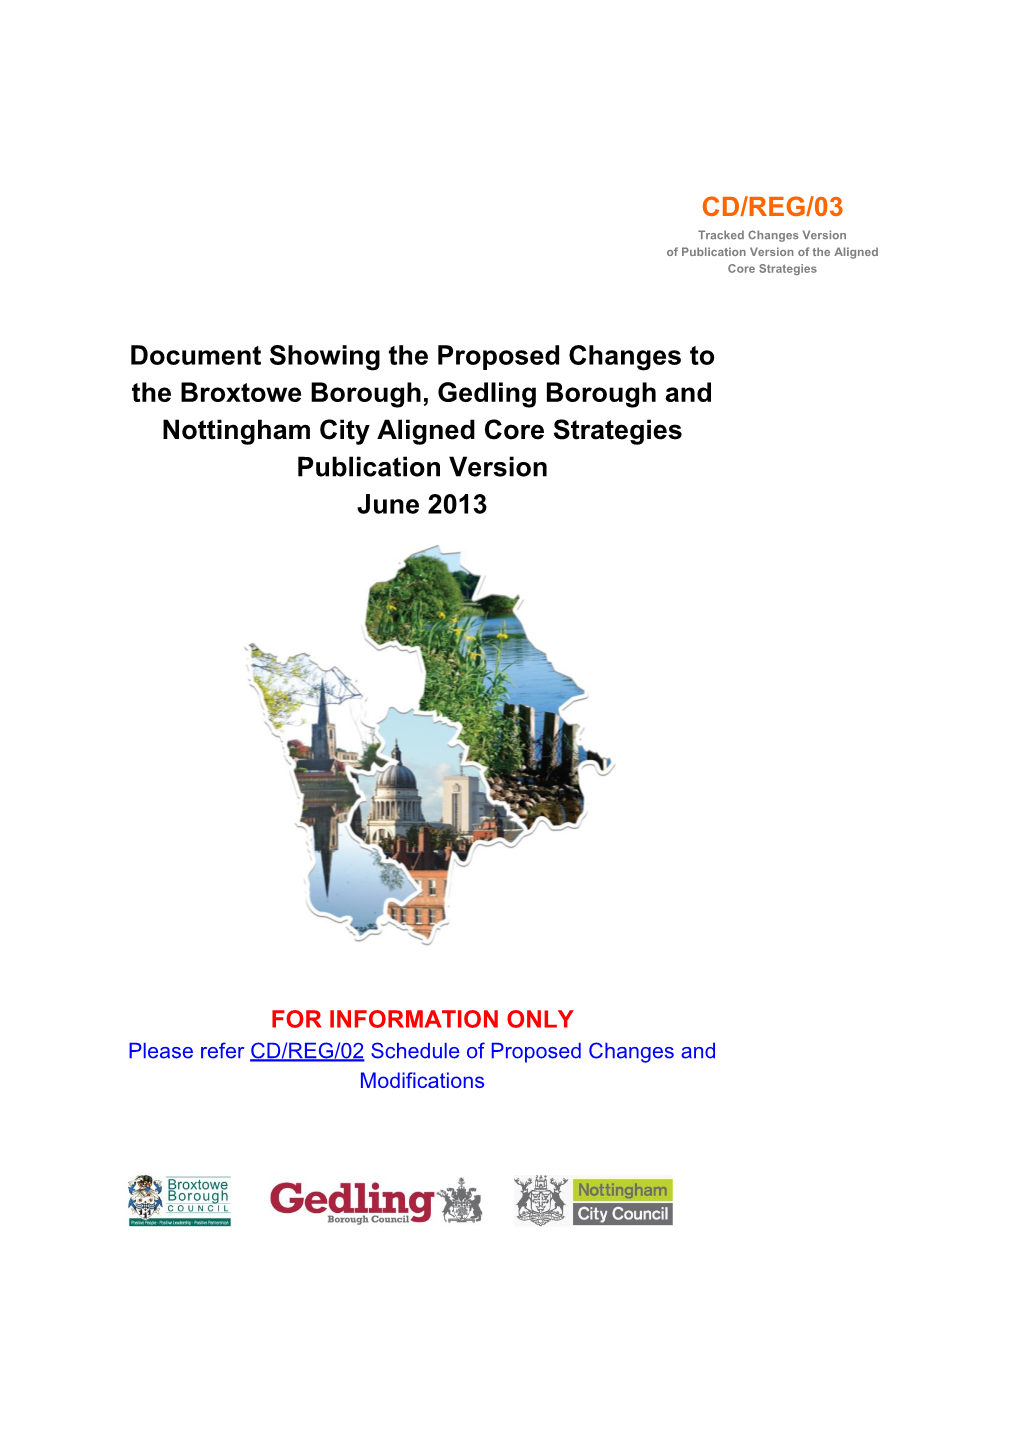 Document Showing the Proposed Changes to the Broxtowe Borough, Gedling Borough and Nottingham City Aligned Core Strategies Publication Version June 2013